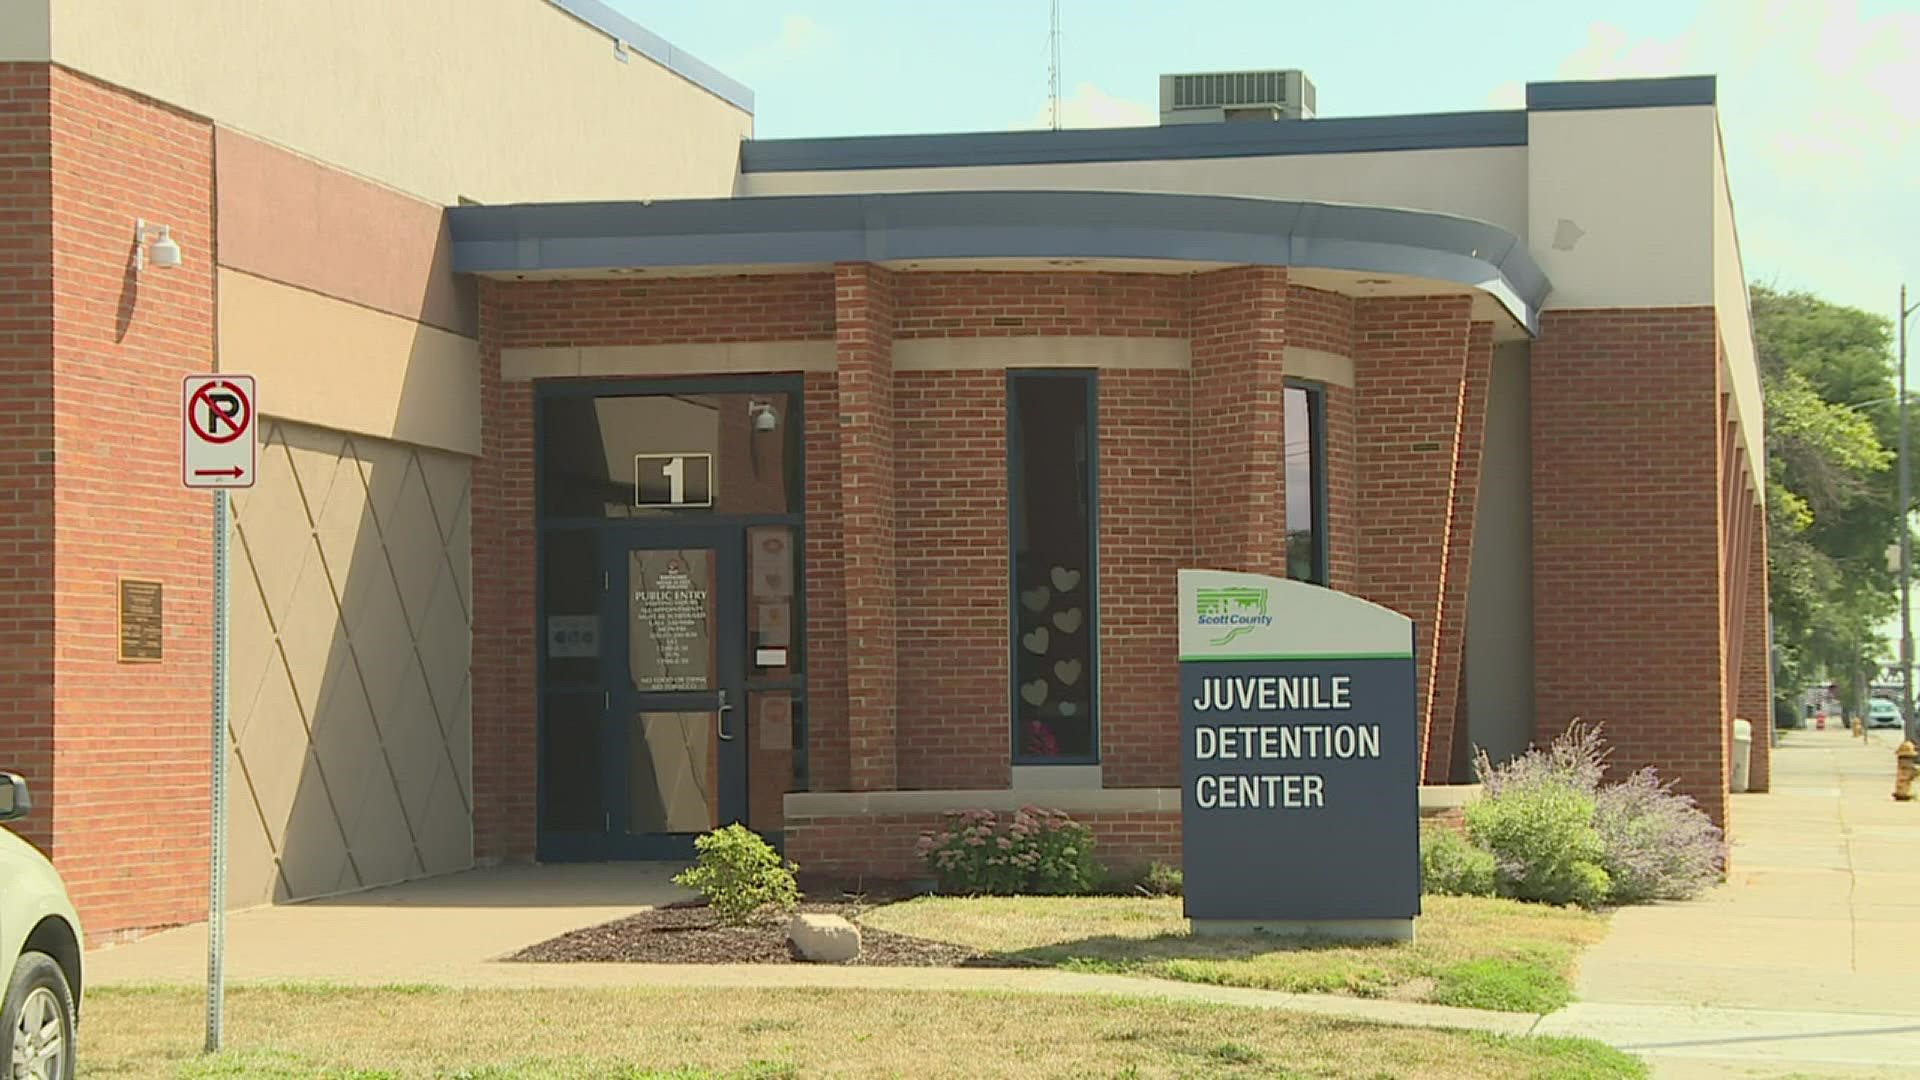 Scott county supervisors and court officials did not support a proposal opposing a new 40-bed juvenile detention center and want to move forward.